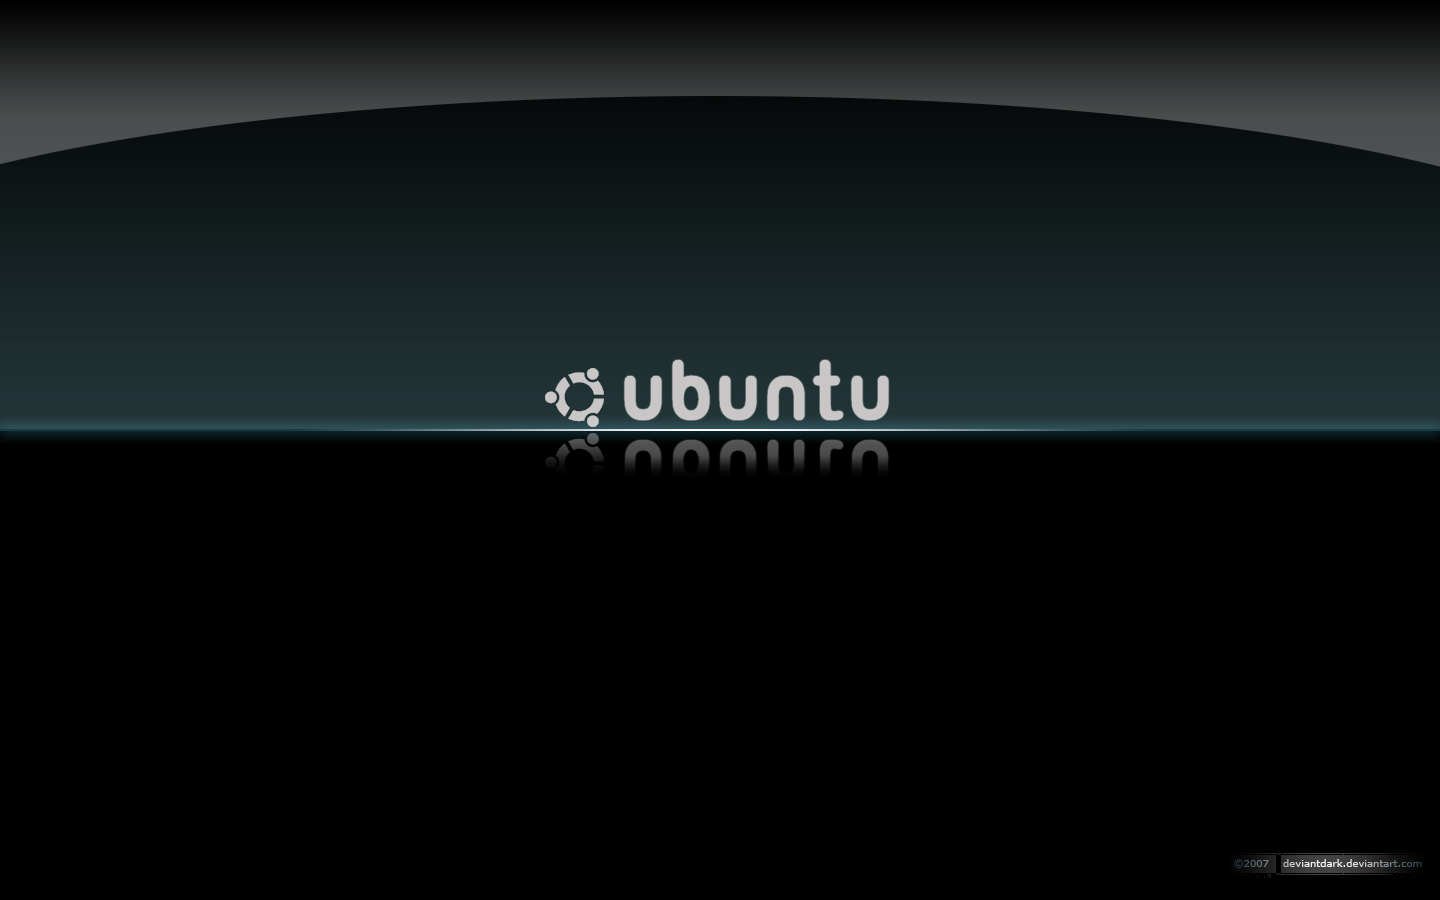 Check out my Ubuntu Wallpaper Category